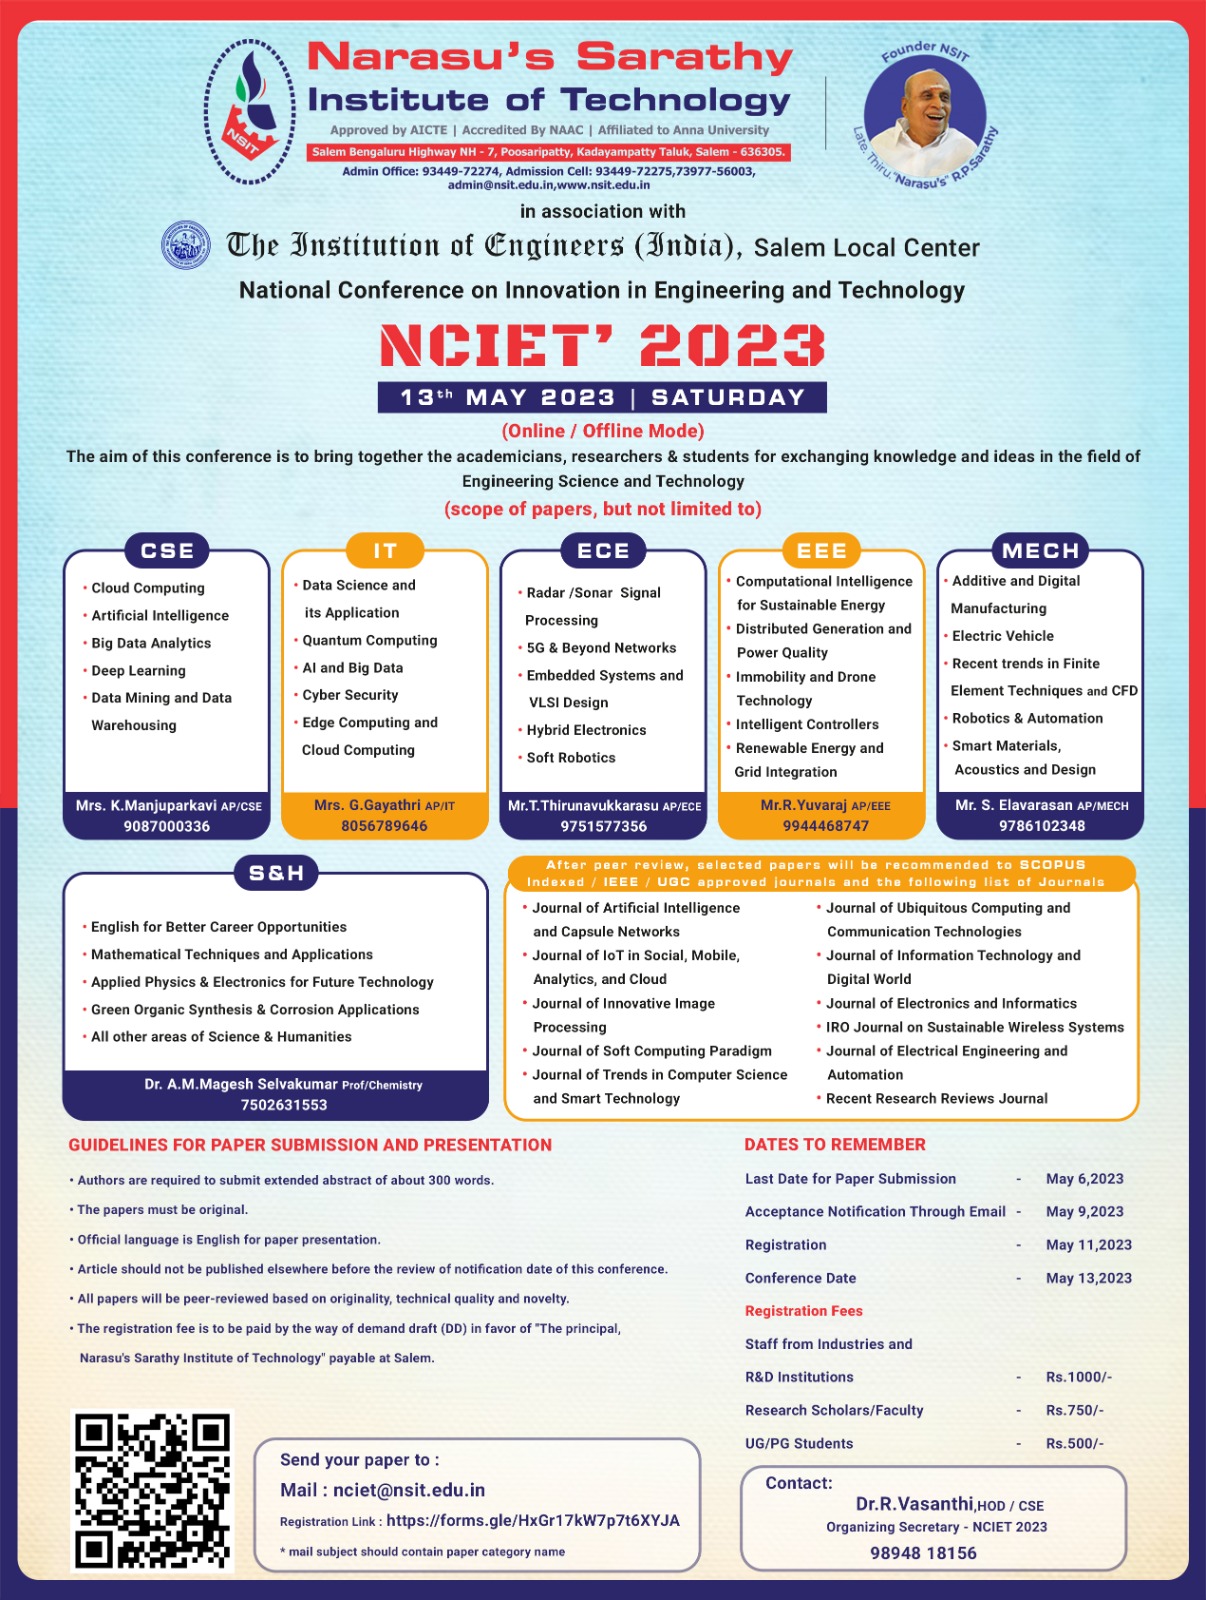  National Conference on Innnovation in Engineering and Technology NCIET'23